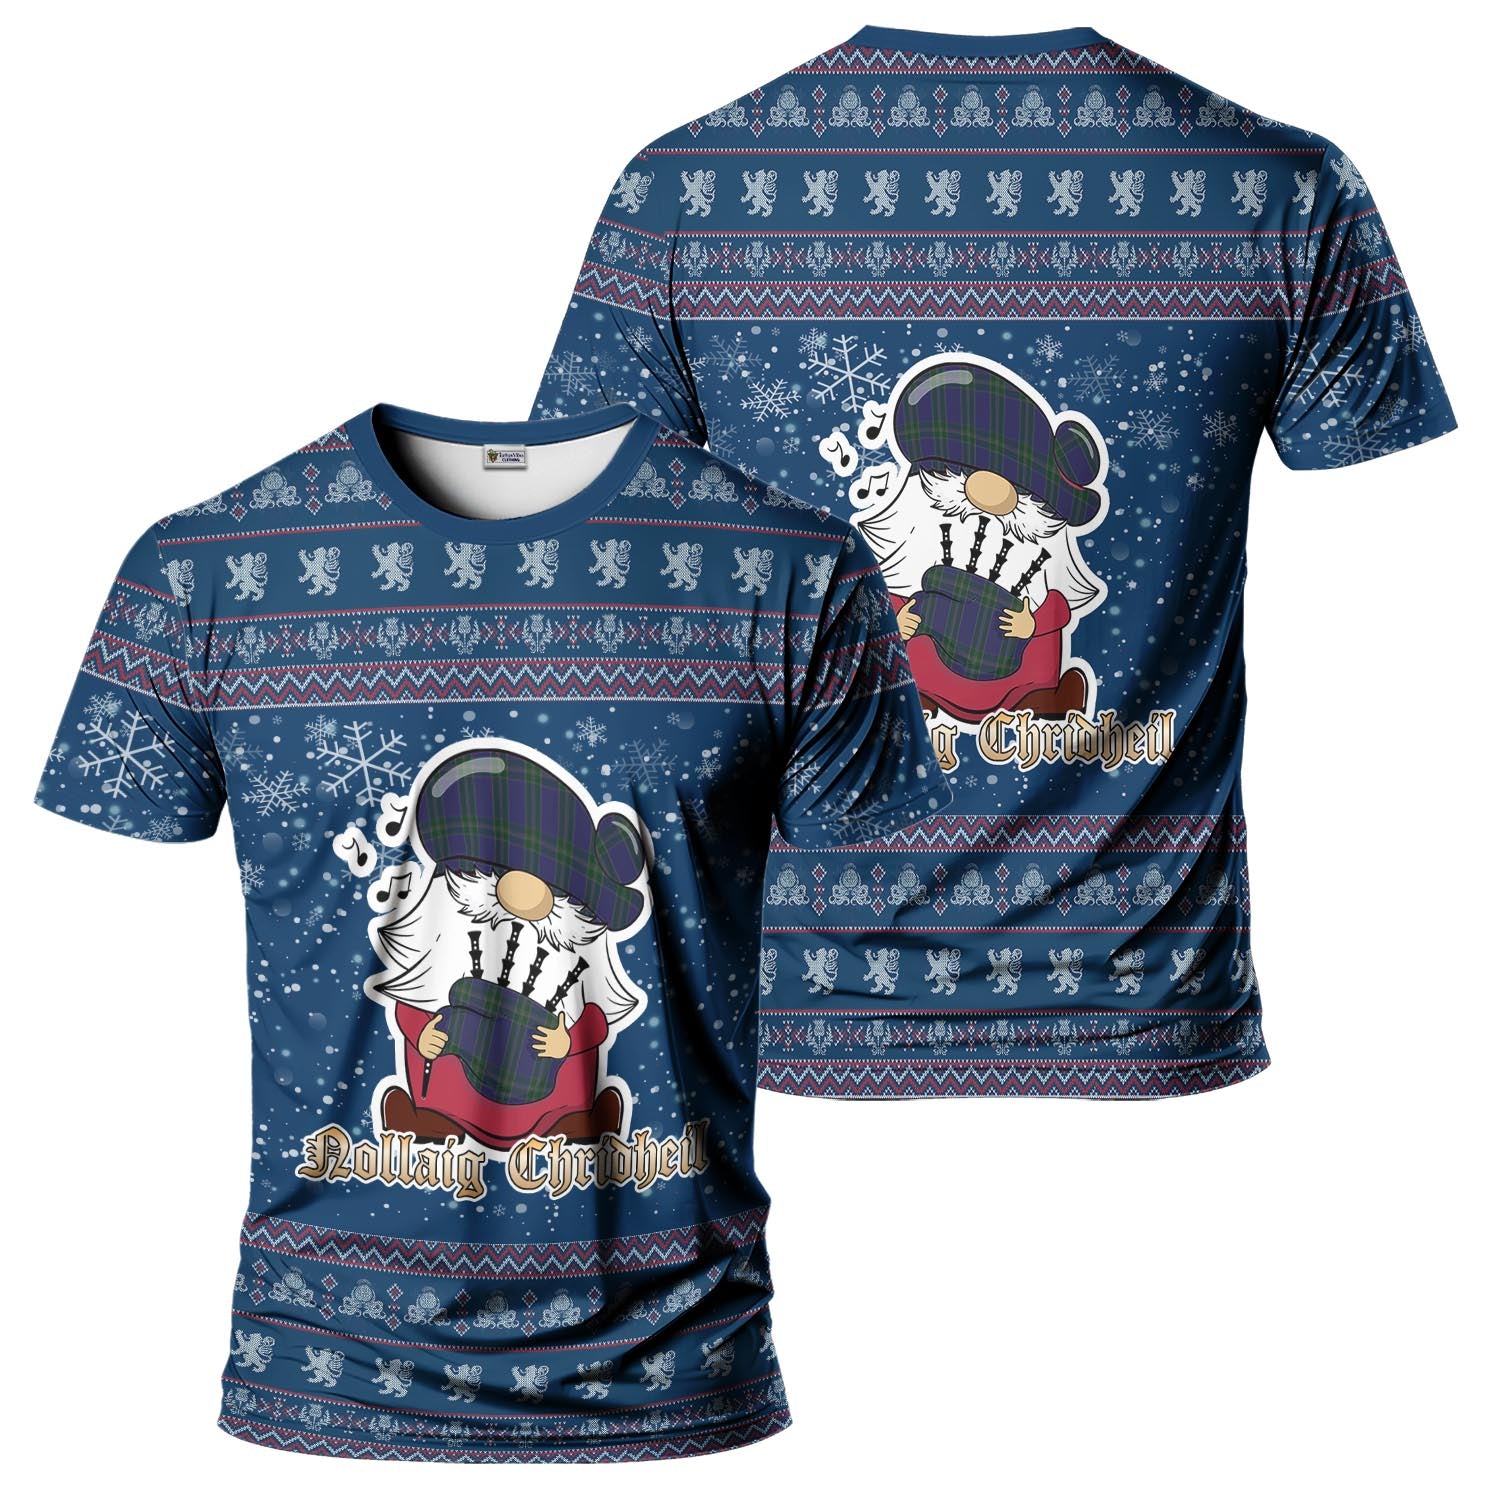 Lewis of Wales Clan Christmas Family T-Shirt with Funny Gnome Playing Bagpipes Kid's Shirt Blue - Tartanvibesclothing